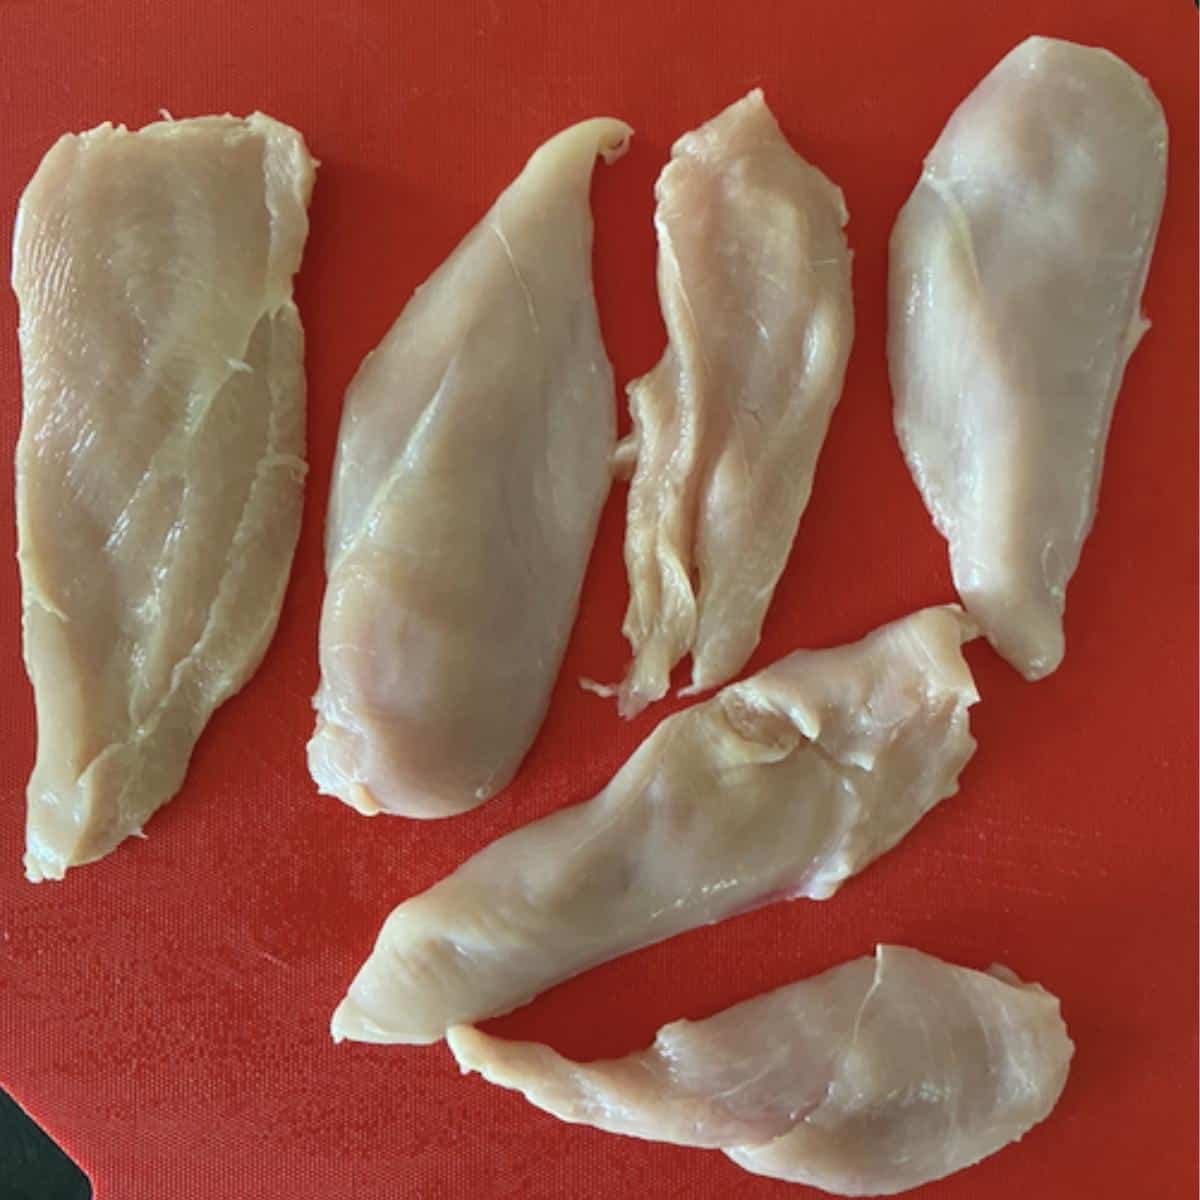 chicken breast sliced in halves on red cutting board